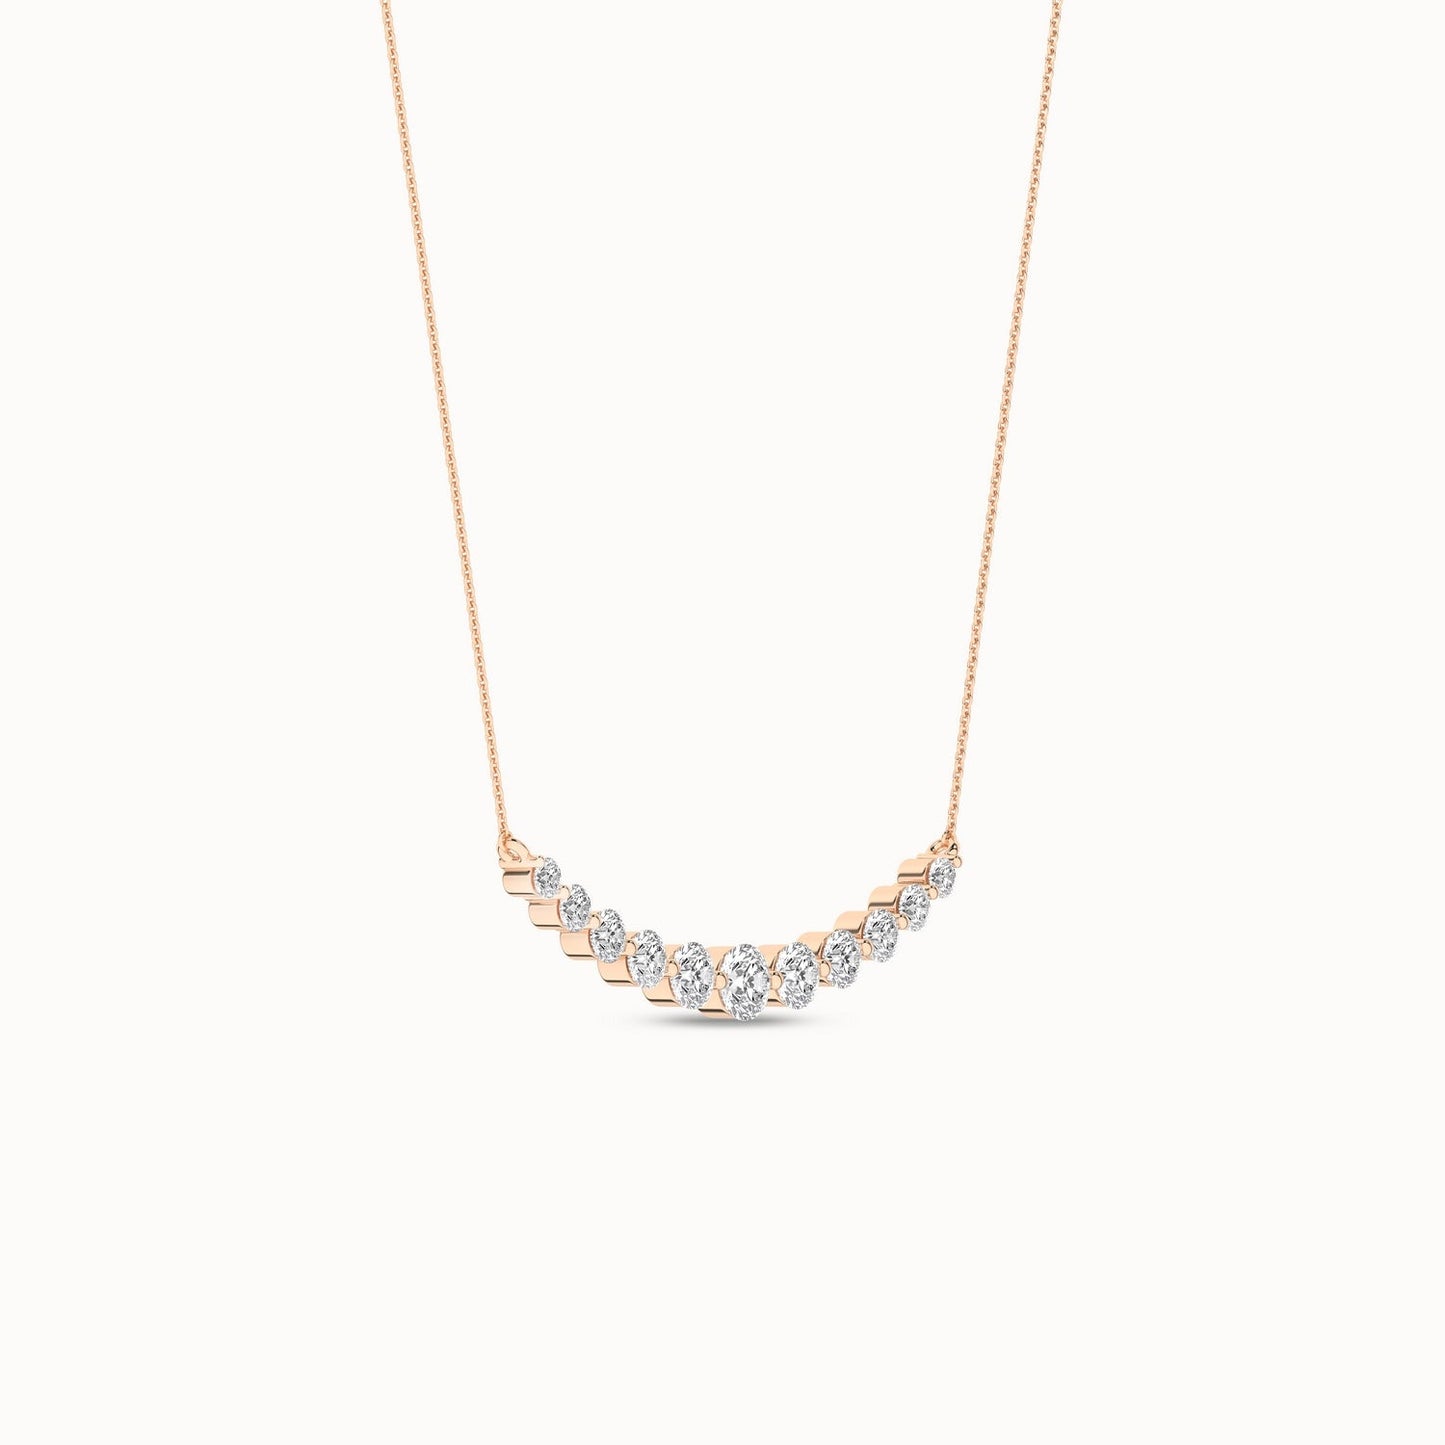 Captivating Necklace_Product Angle_1Ct. - 3